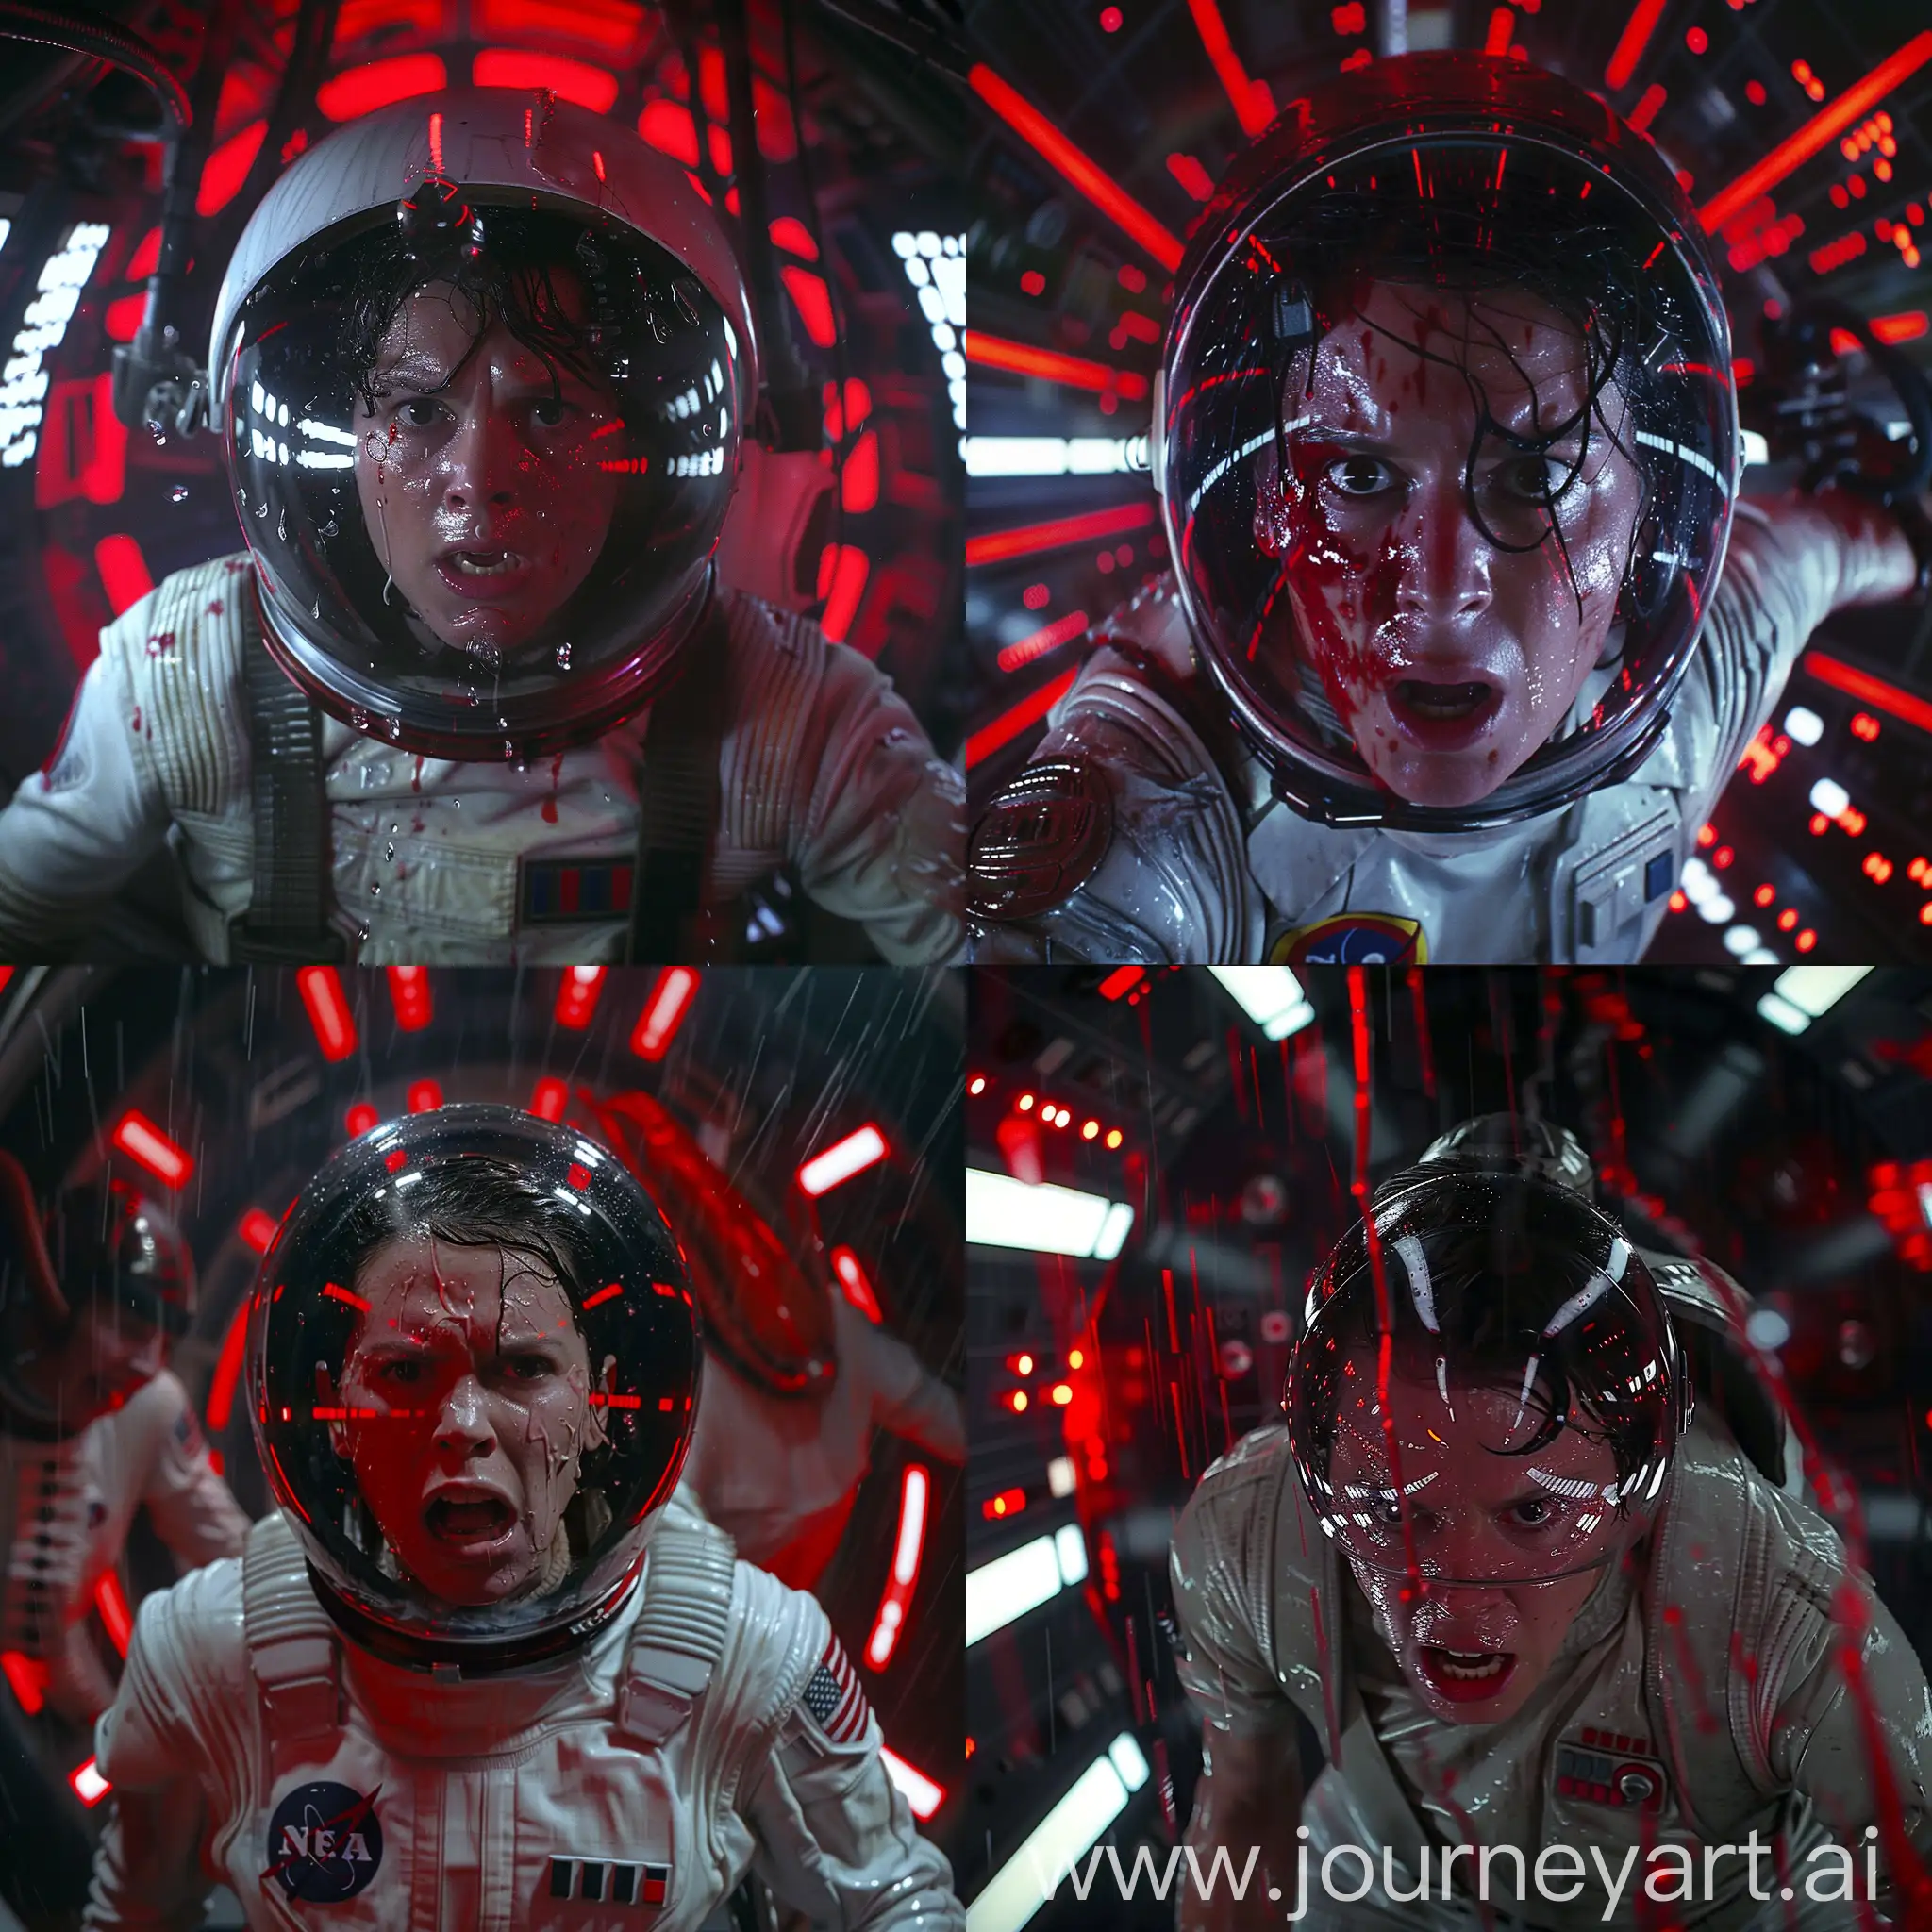 Cinematic scenes from the New Alien Film, with Rey Skywalker as the main character of the film, wearing the astronaut uniform from the film Alien, in the claustrophobic, dense and dark interior of the Nostromo spaceship with red lights, with Rey Skywalker's face very frightened by the wet hair and very sweaty, with the reflection of the Alien in front of him reflecting on the visor of his astronaut helmet,